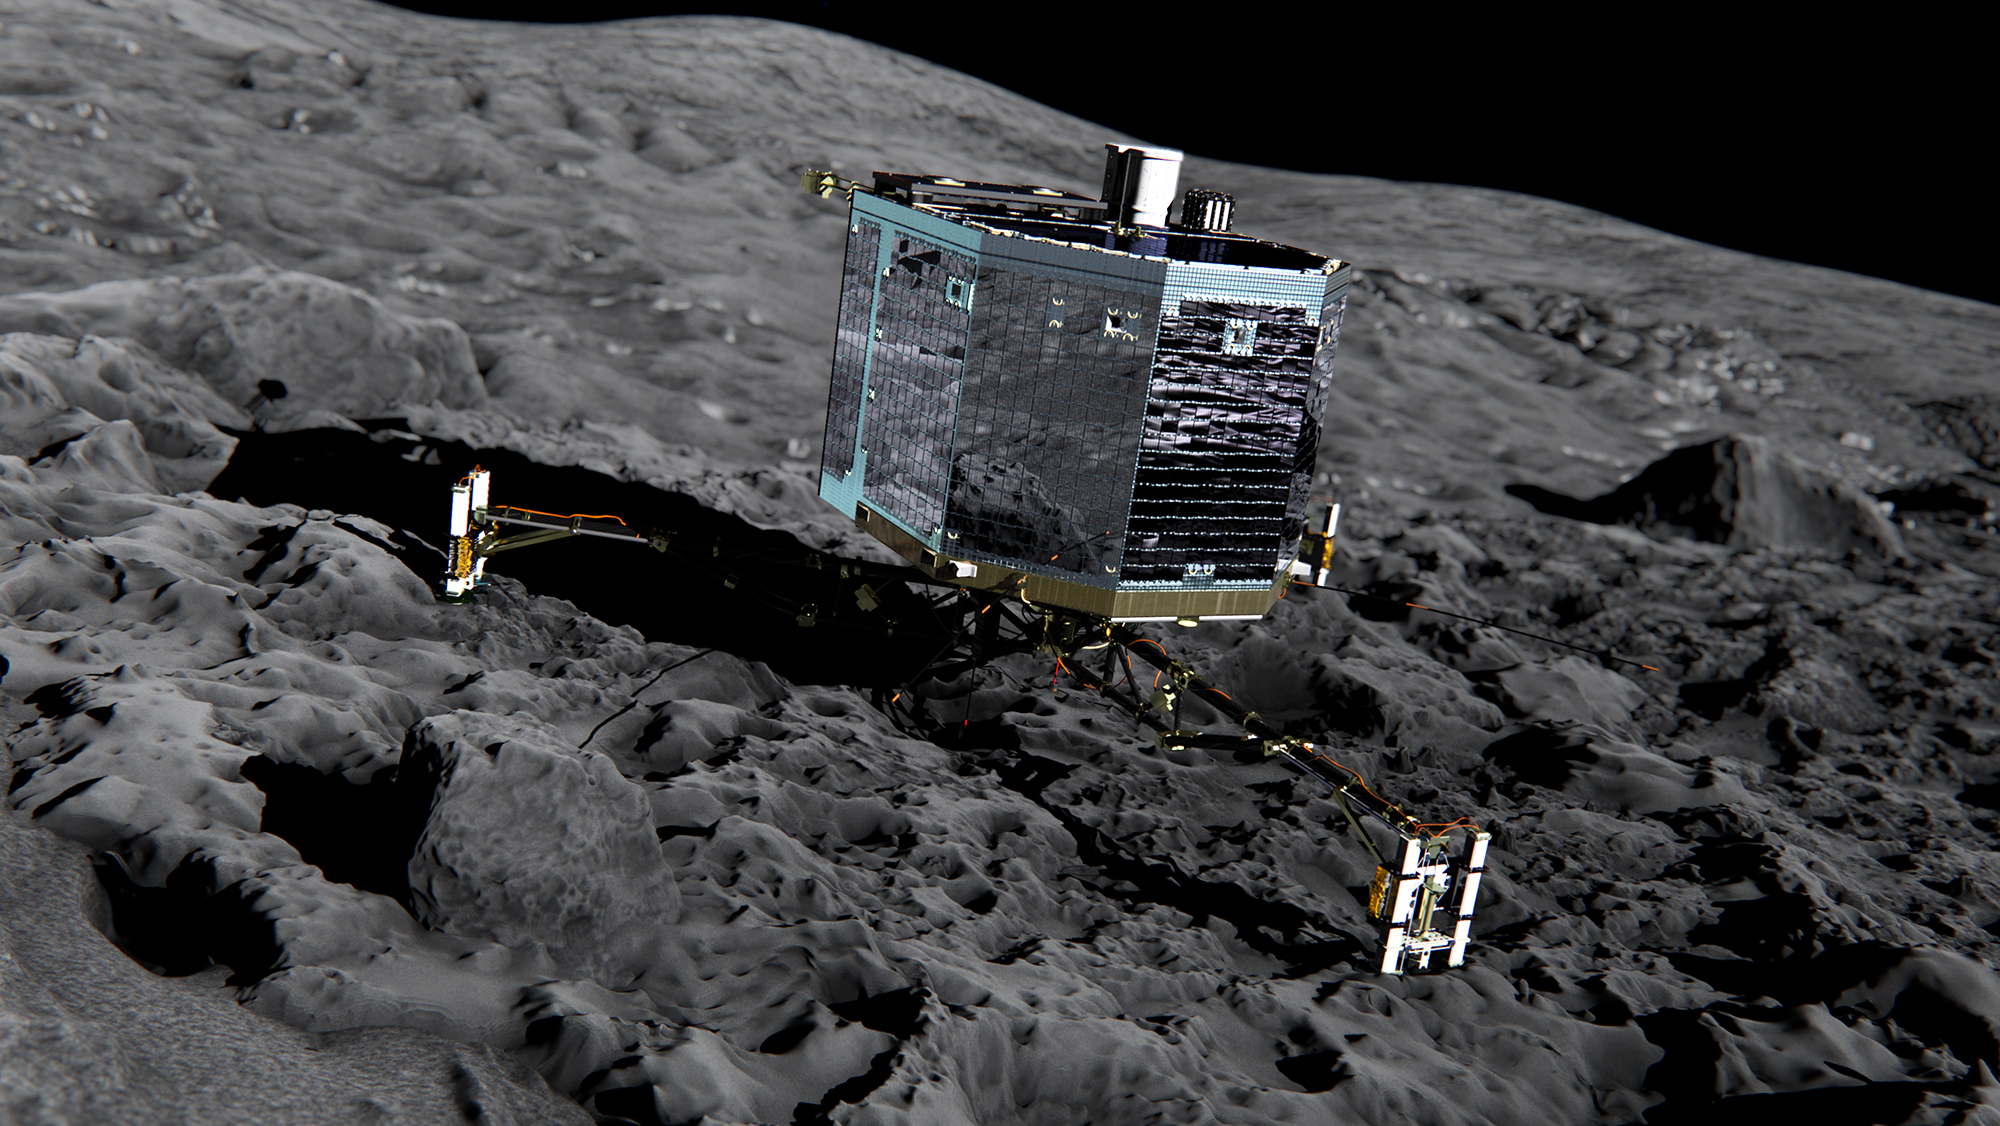 From the European Space Agency (ESA): "Artist’s impression of Rosetta’s lander Philae (front view) on the surface of comet 67P/Churyumov-Gerasimenko. Philae will be deployed to the comet in November 2014 where it will make in situ observations of the comet surface, including drilling 23cm into the subsurface to extract material for analysis in its on board laboratory." Image Credit:  ESA/ATG medialab